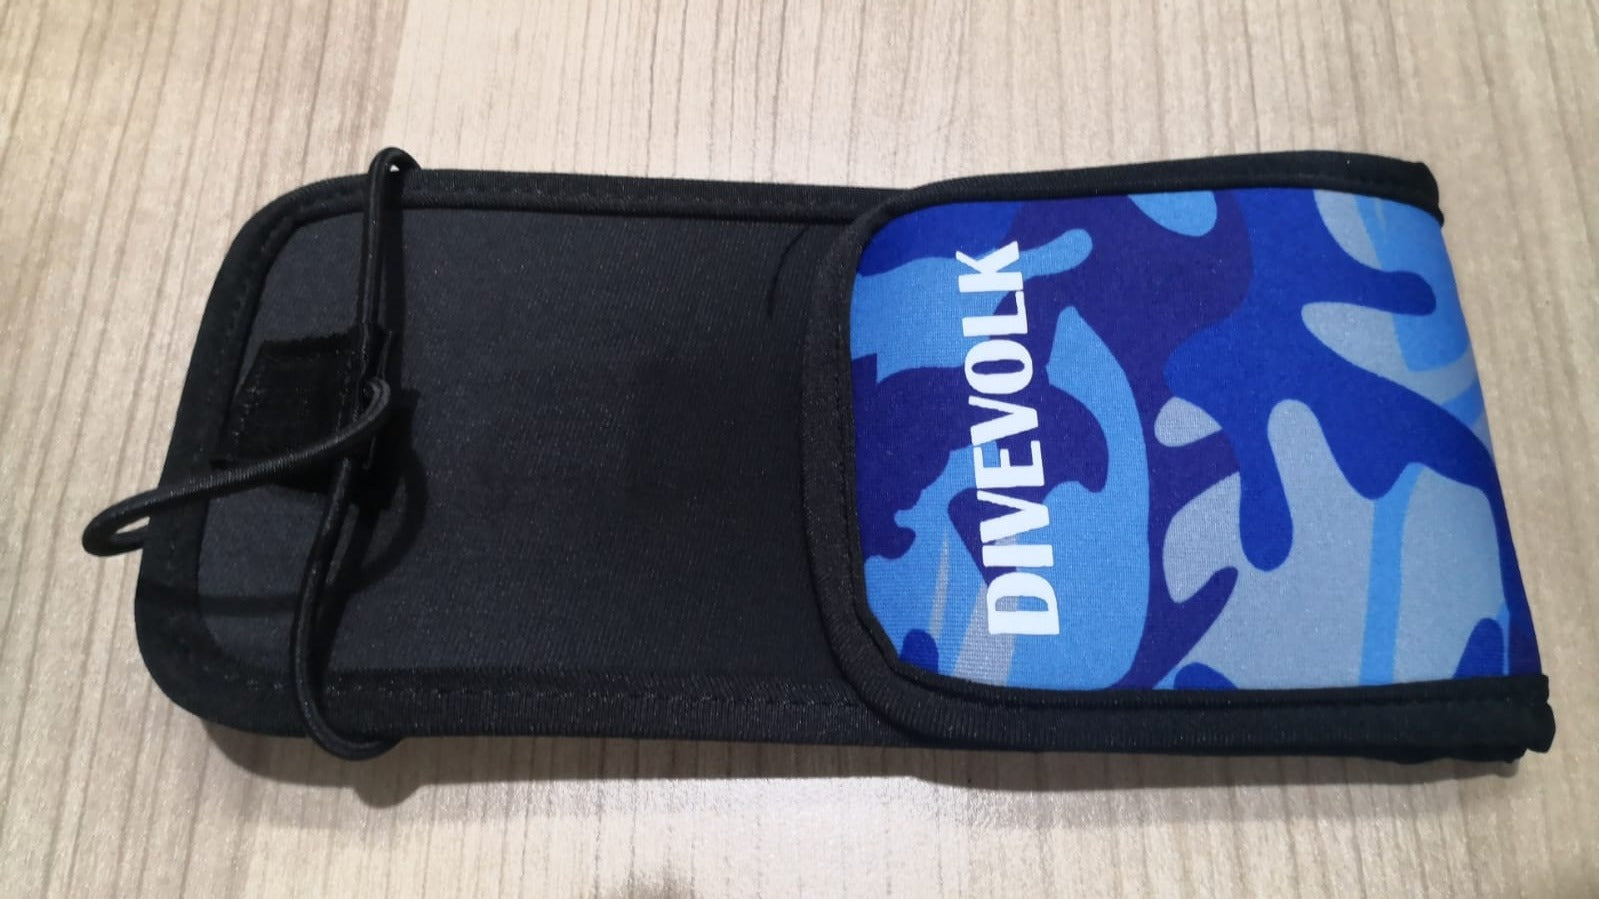 Divevolk Protective Bag for Seatouch 3 & 4 Housing